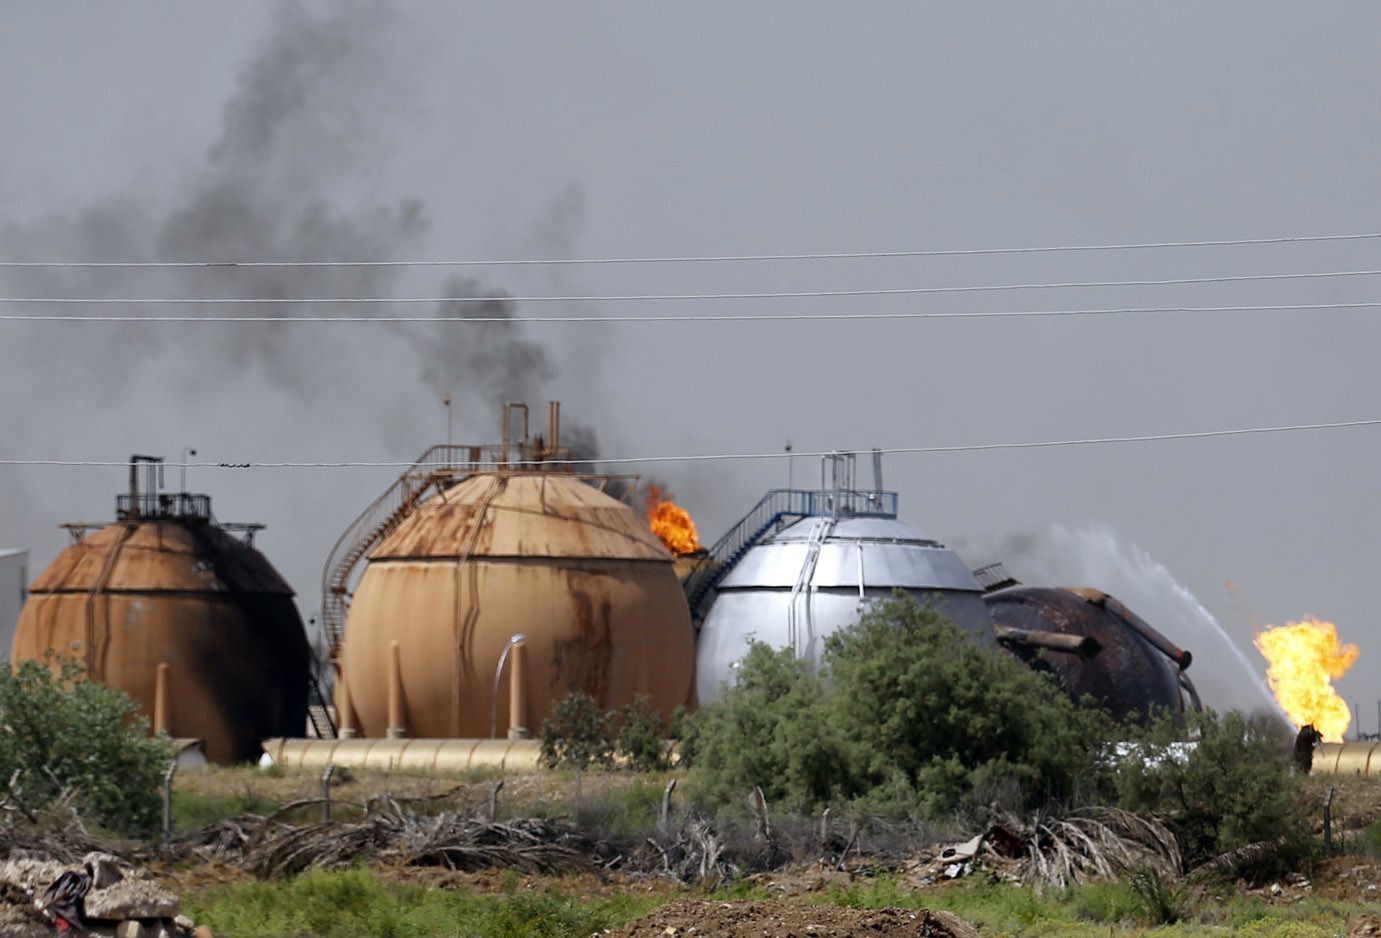 Iraqi firefighters try to extinguish a fire at a natural gas plant in Taji, Iraq, on Sunday.